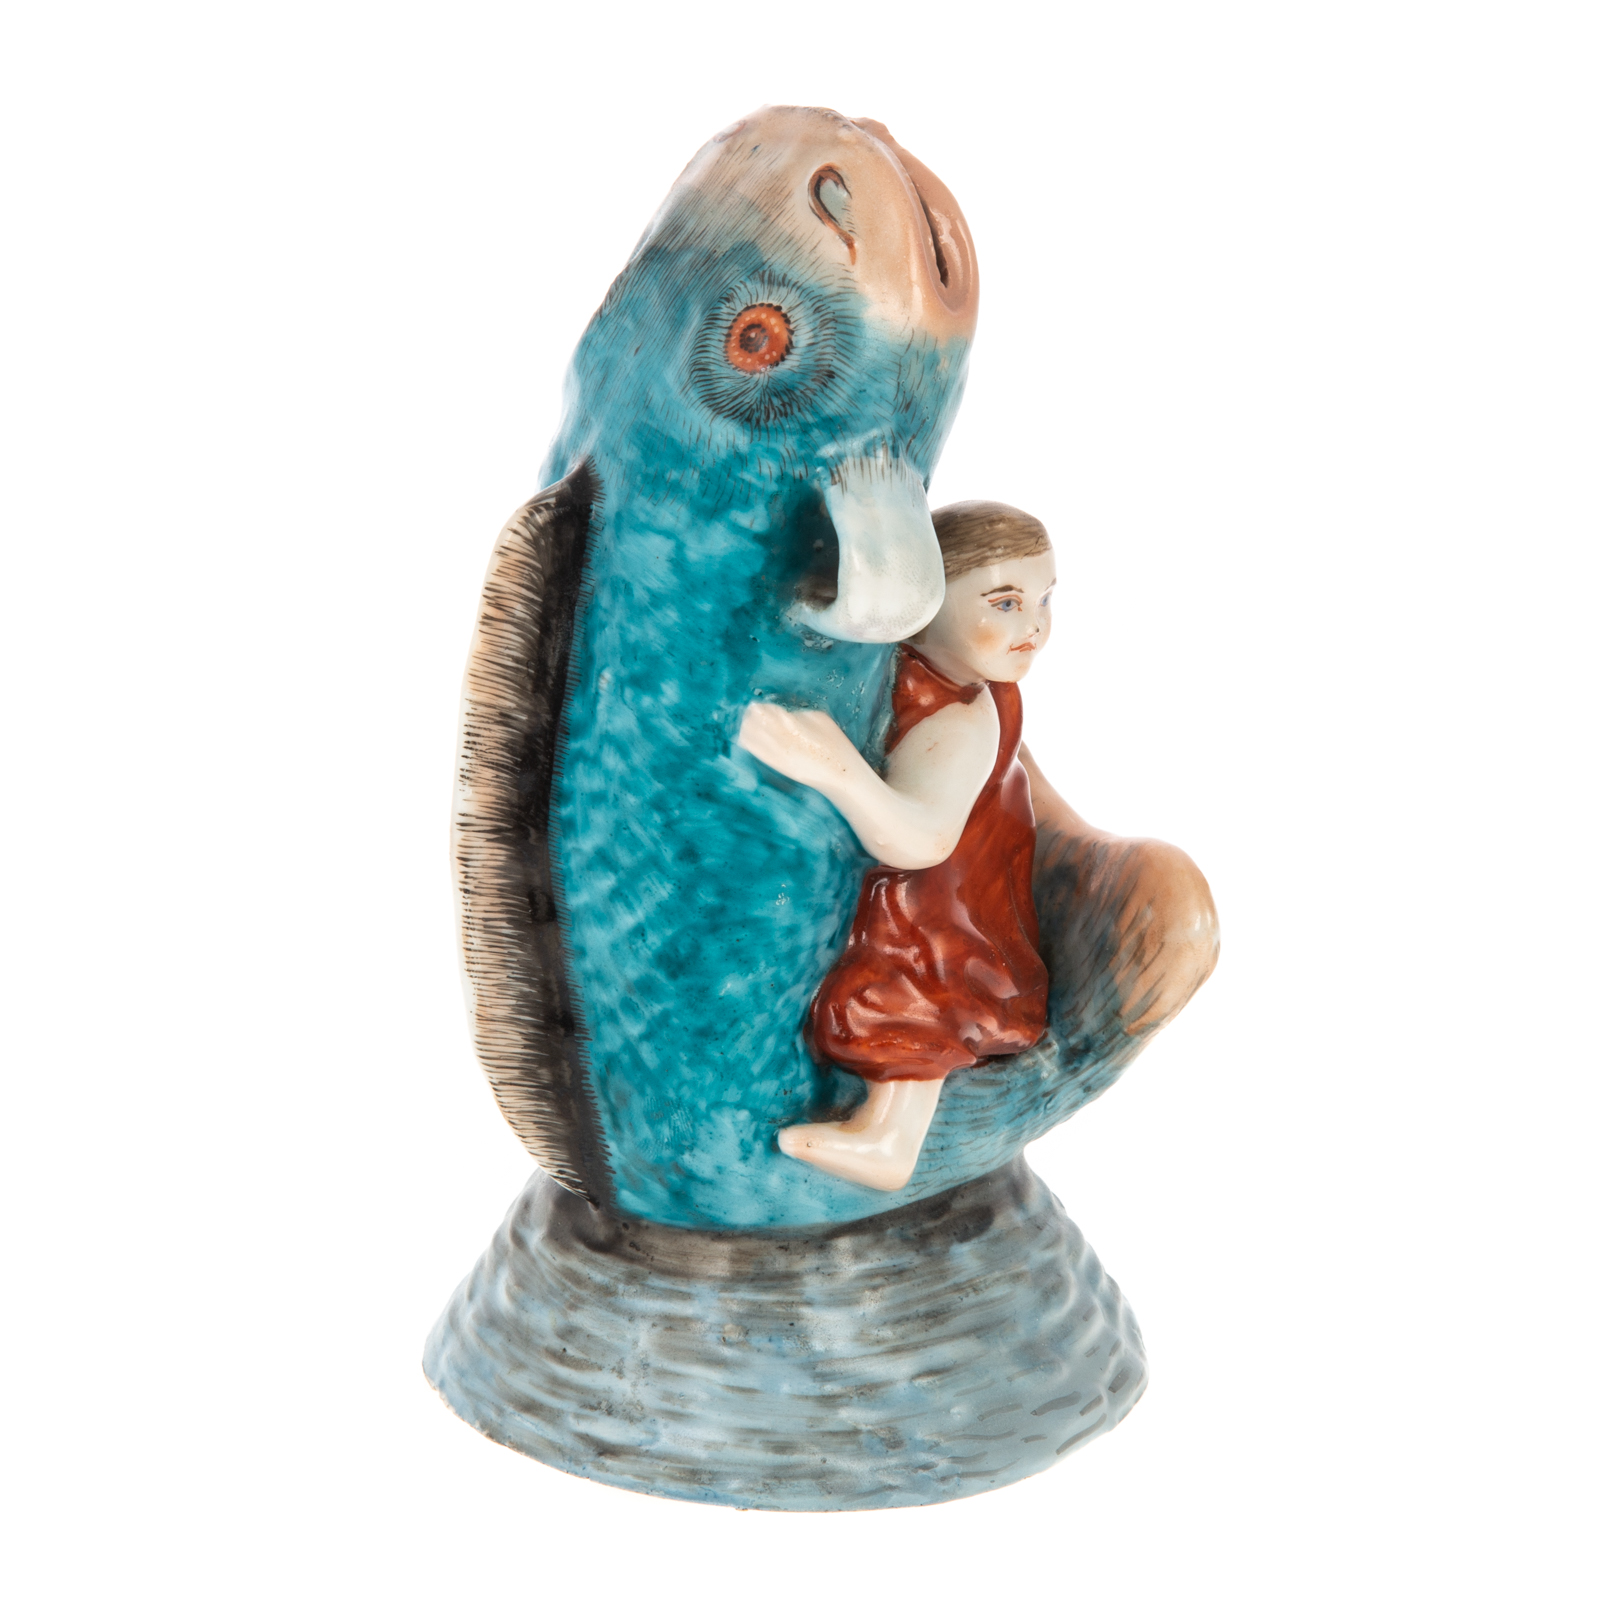 CHINESE EXPORT PORCELAIN FISH FIGURAL